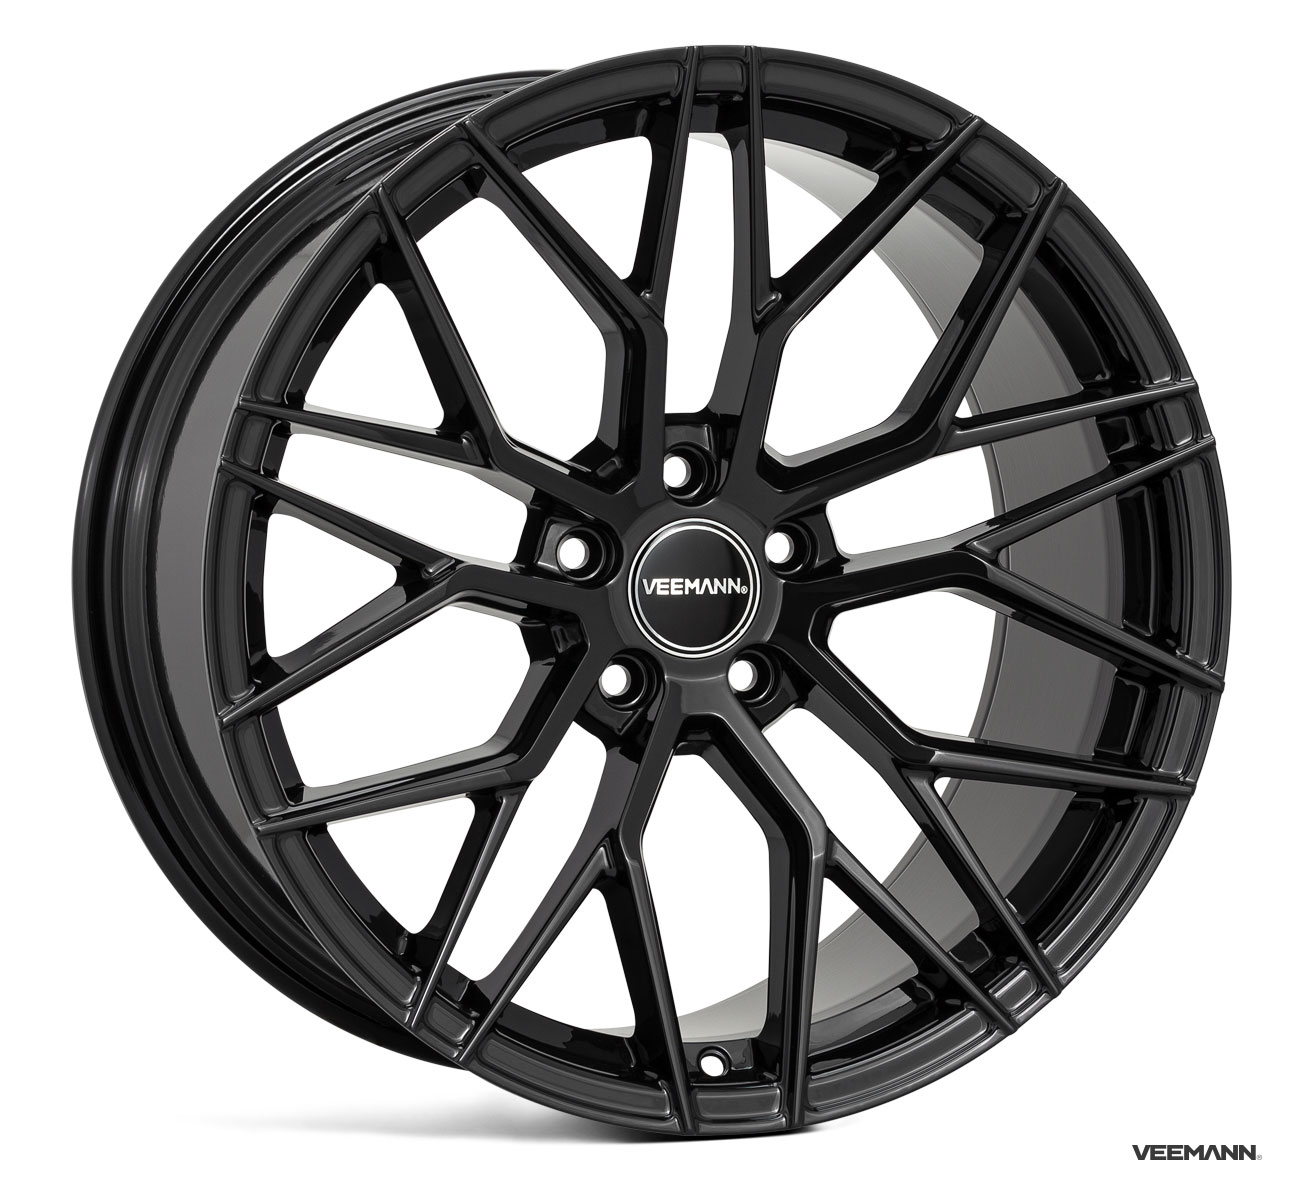 NEW 19" VEEMANN VC520 ALLOY WHEELS IN GLOSS BLACK WITH WIDER 9.5" REARS